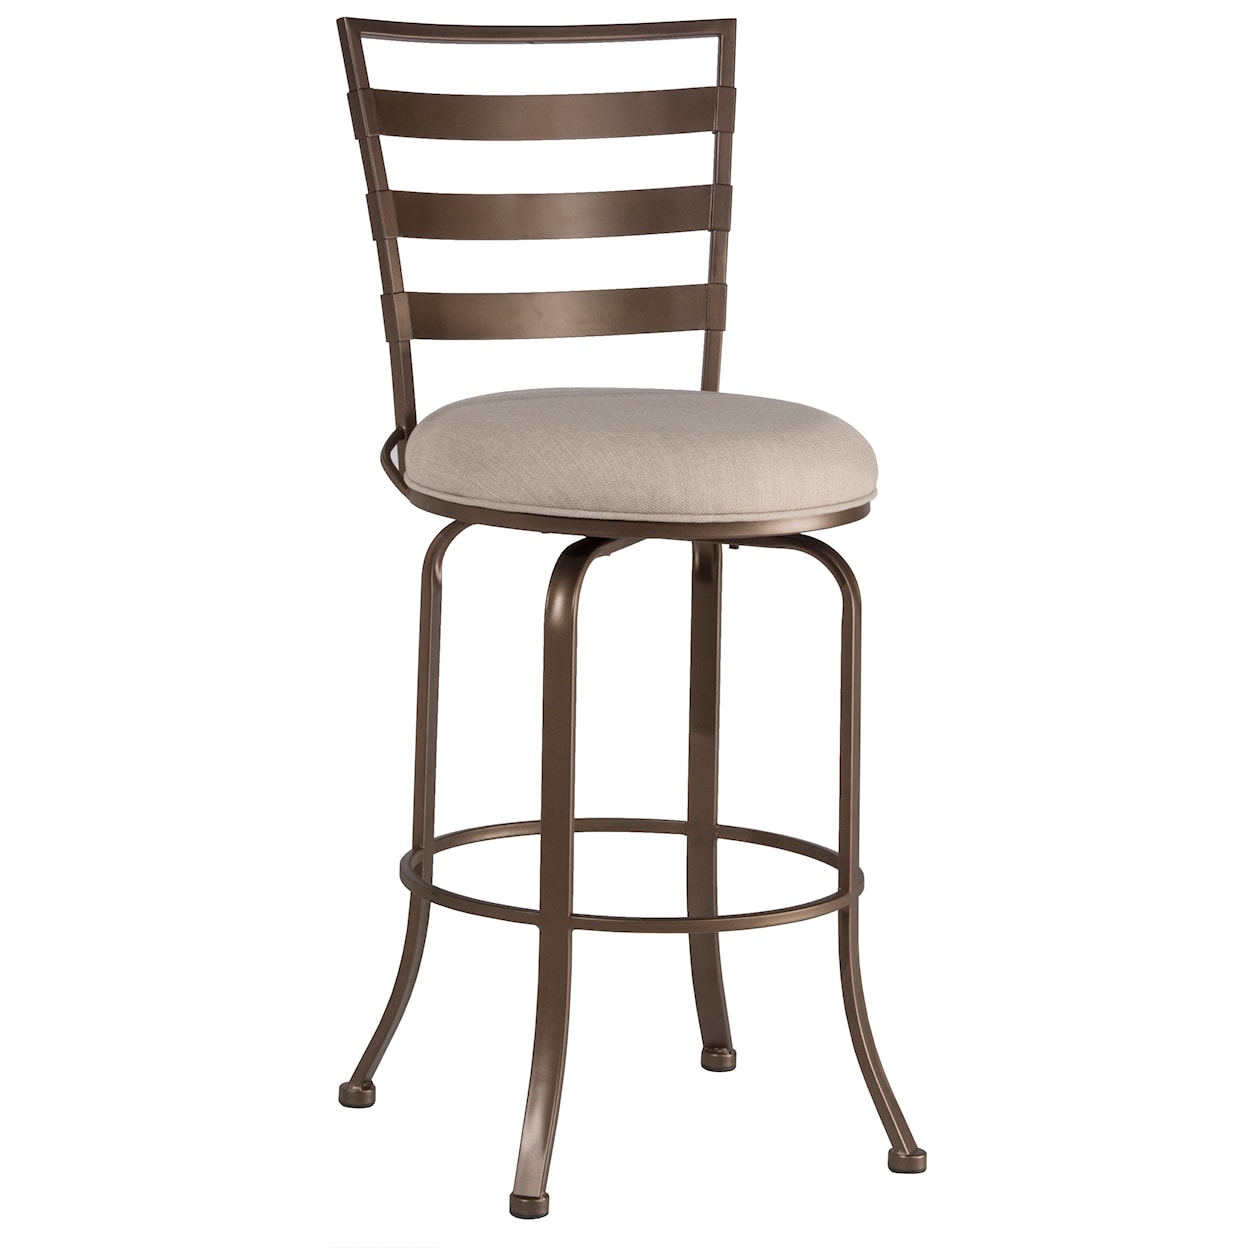 Hillsdale Kaufman Commercial Grade Stools Counter Stool